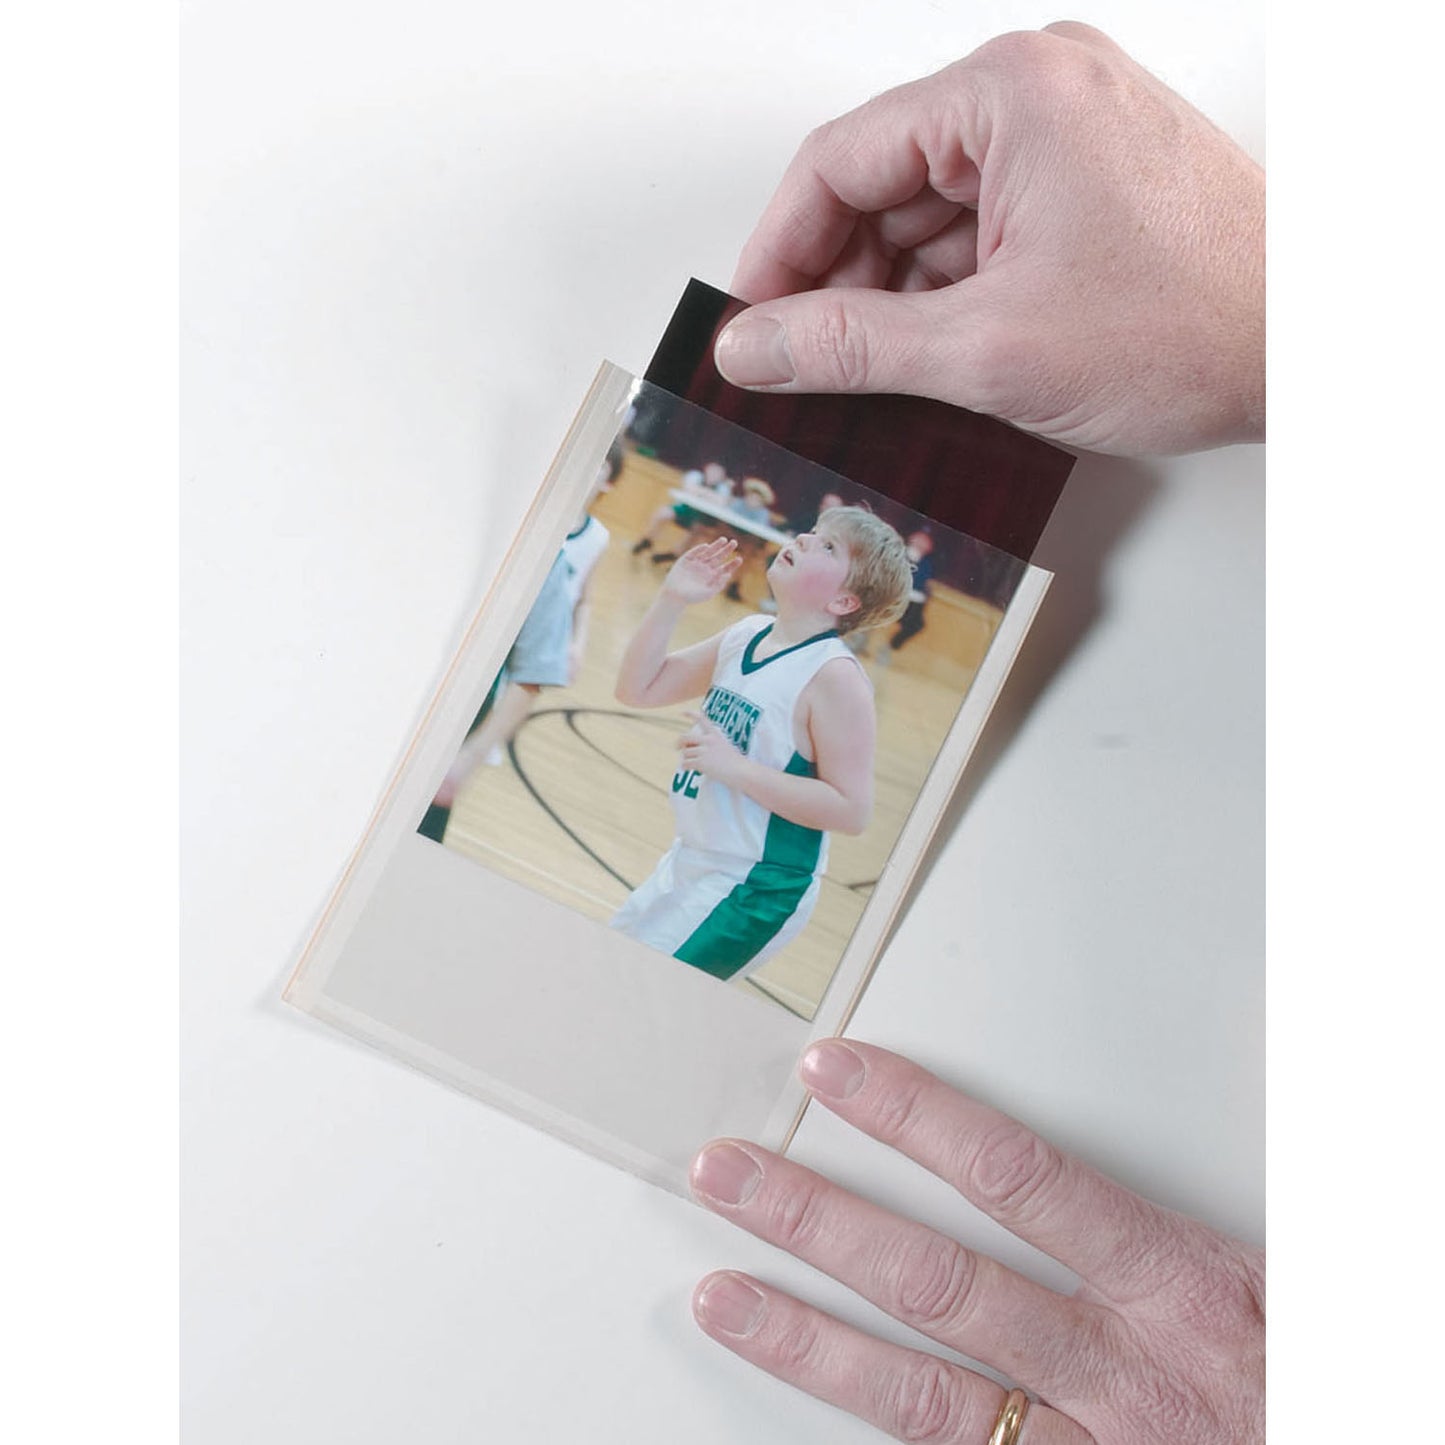 Clear View Self-Adhesive Photo/Index Card Pocket 4" x 6", 25 Per Pack, 5 Packs